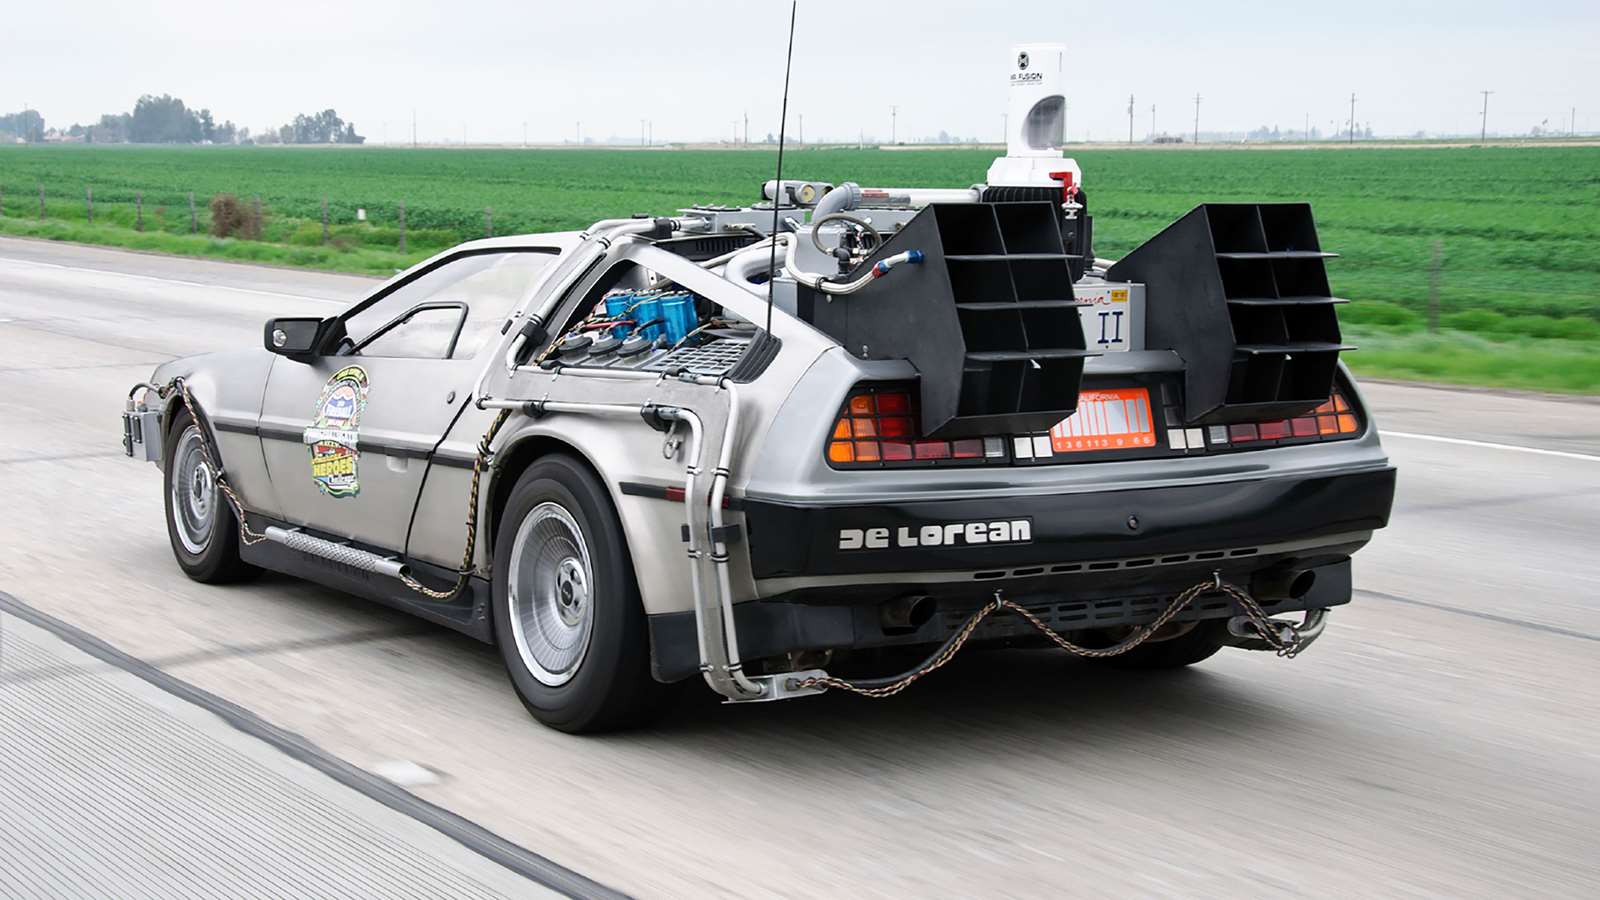 https://www.goodwood.com/globalassets/.road--racing/road/news/2020/5-may/best-sci-fi-cars/best-sci-fi-cars-may-fourth-dmc-delorean-back-to-the-future-goodwood-04052020.jpg?crop=(0,221,2600,1684)&width=1600